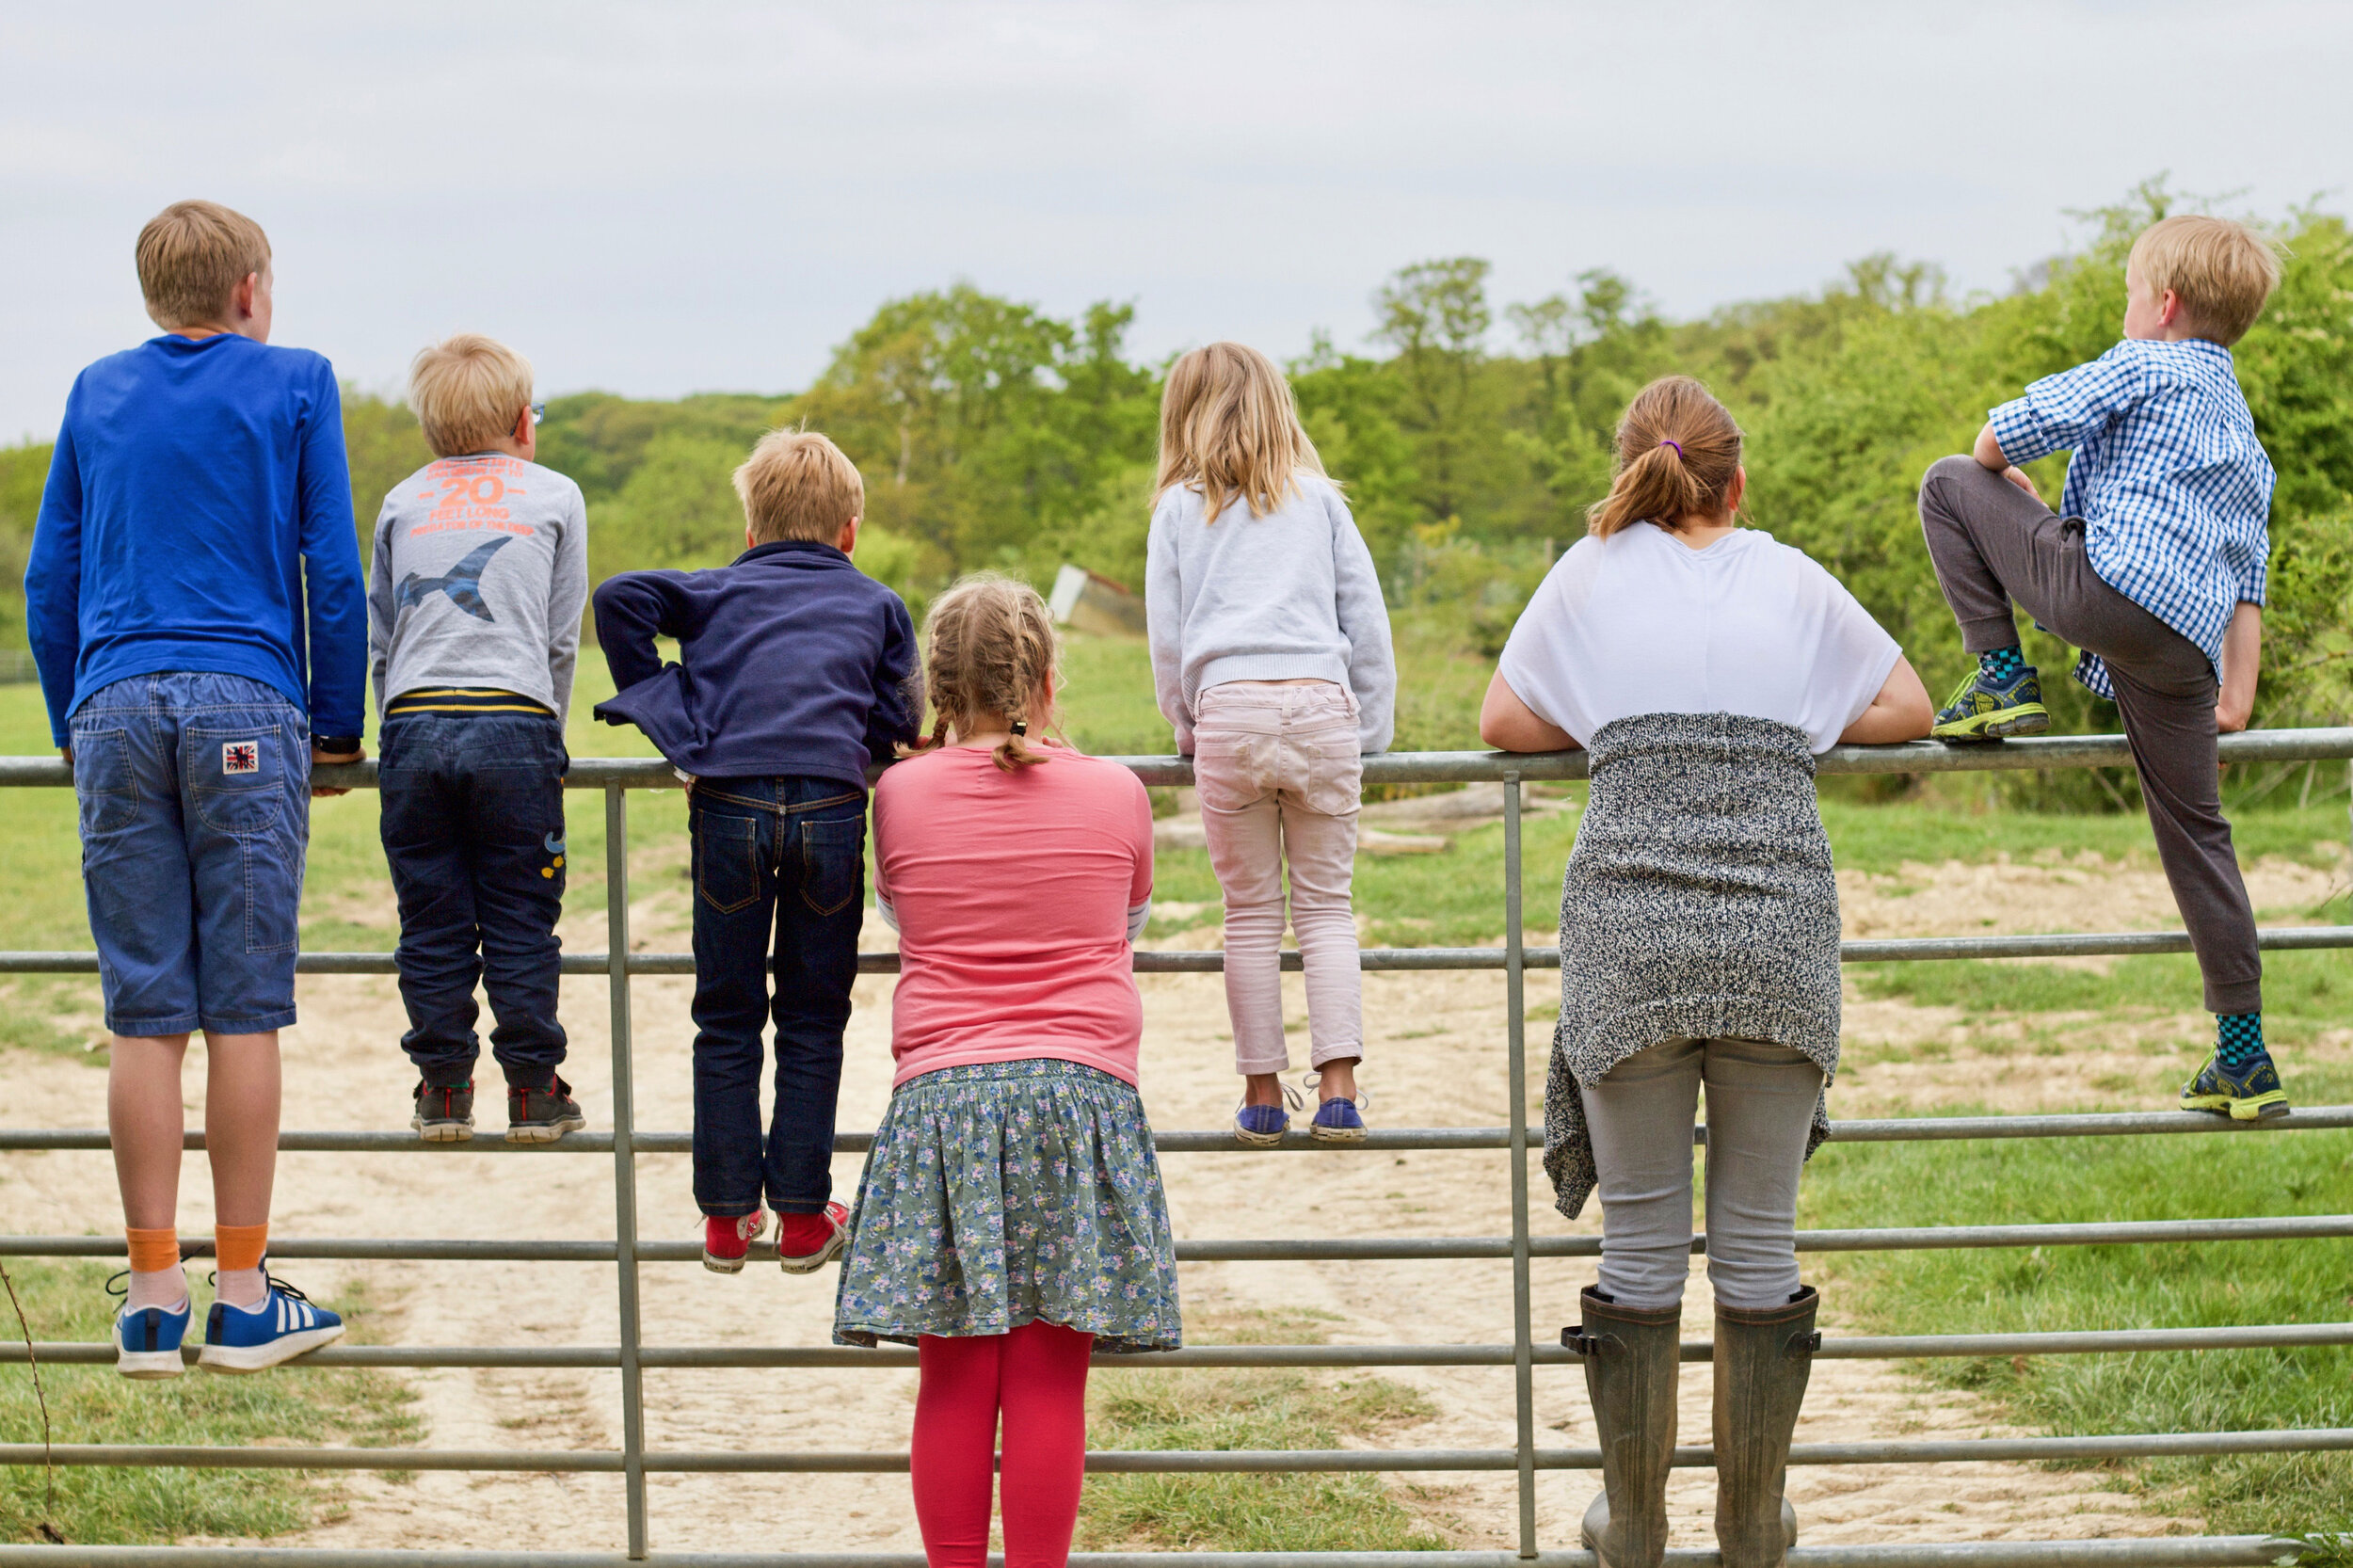 Children Looking Over Gate into Field